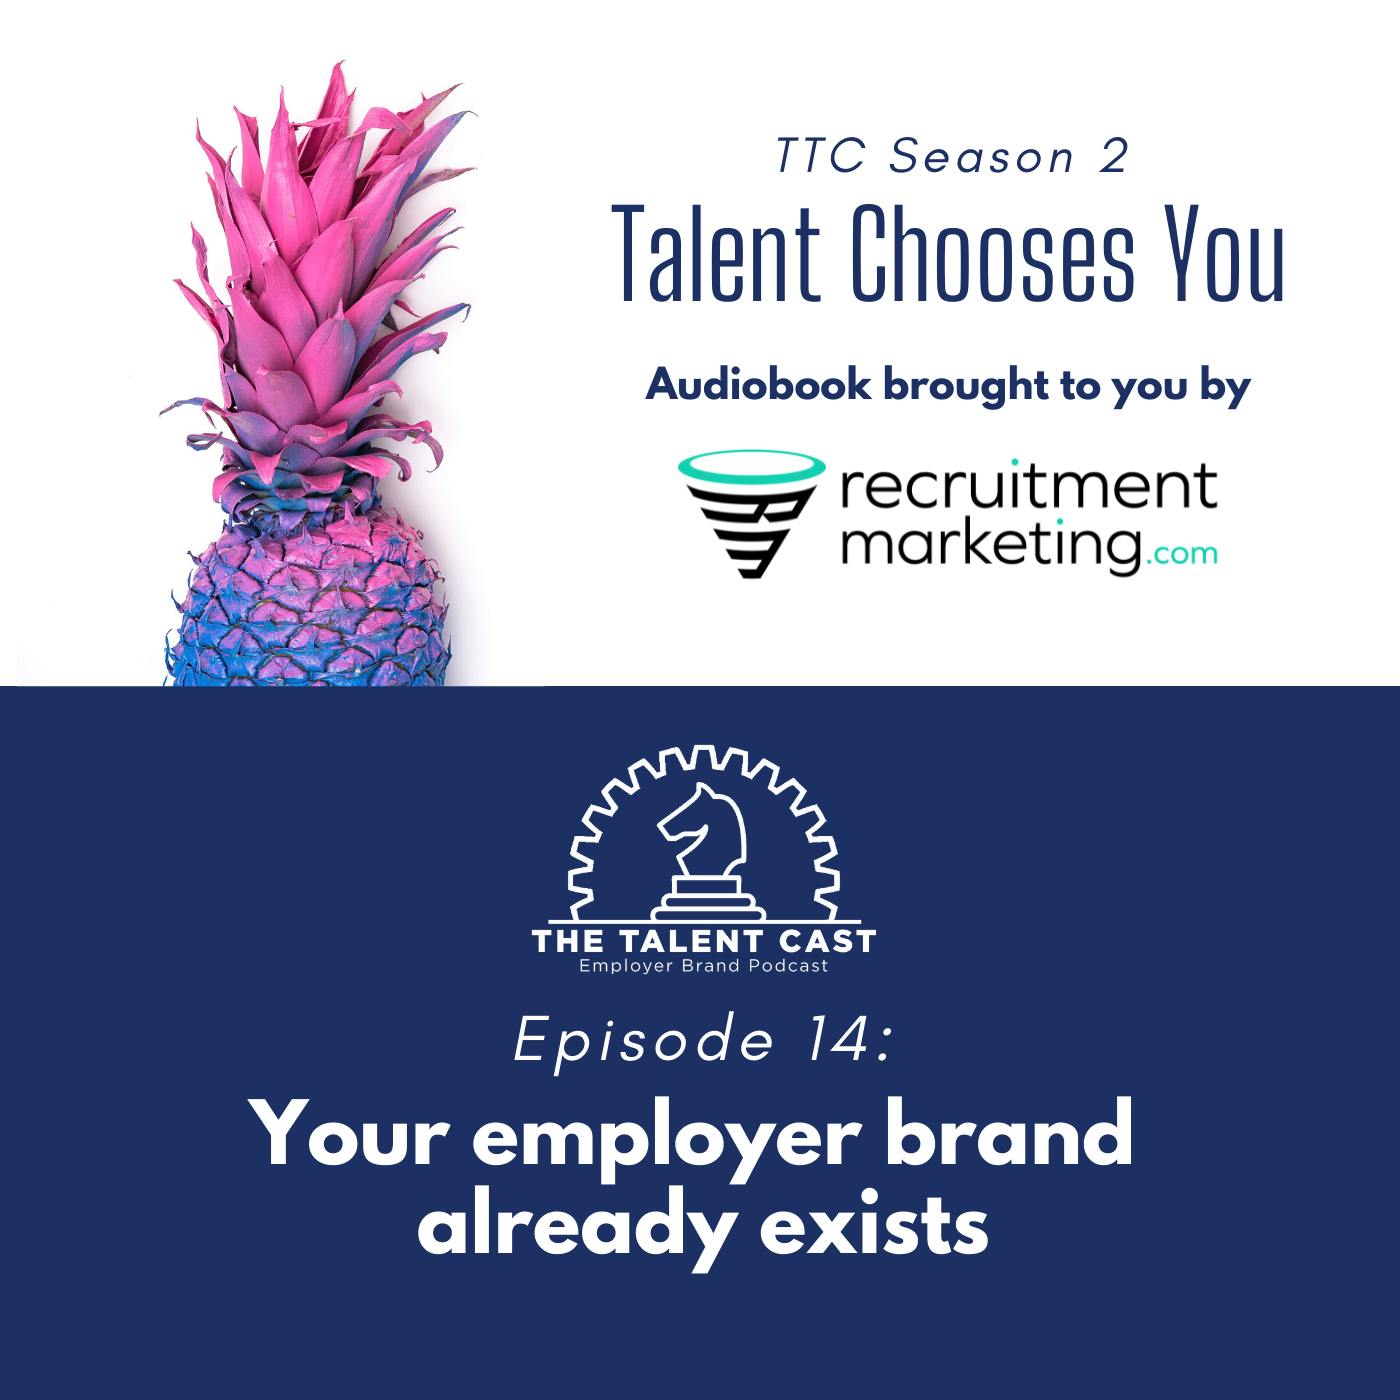 Your employer brand already exists